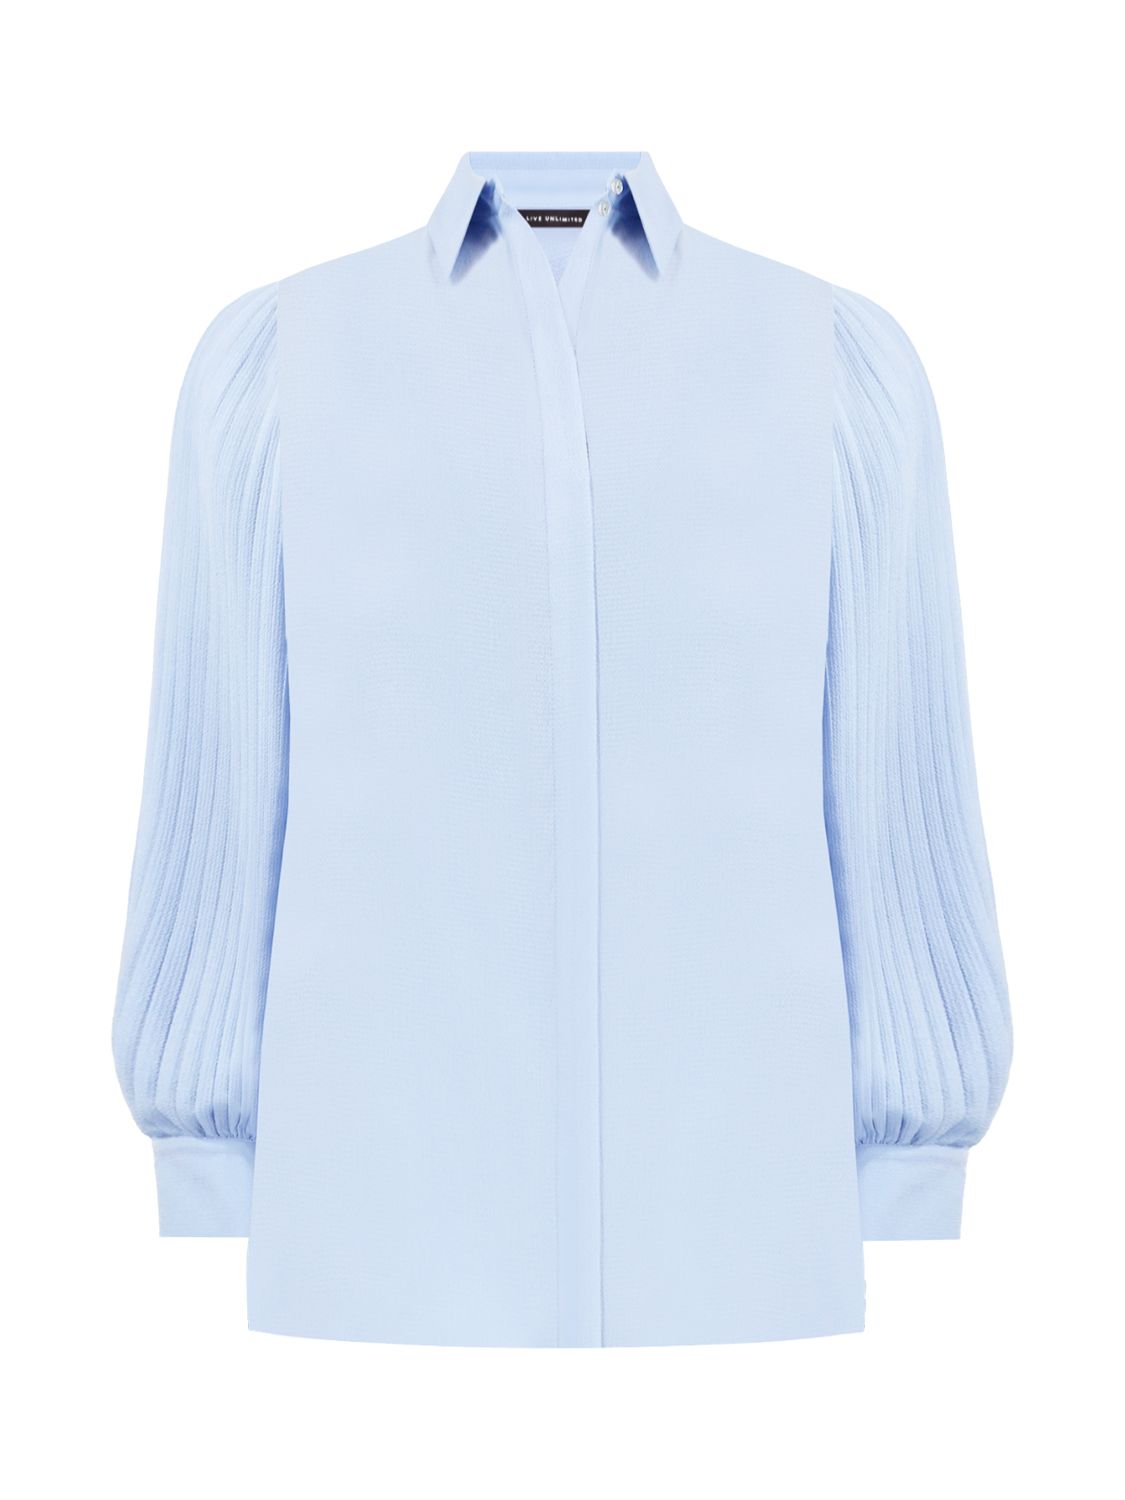 Buy Live Unlimited Curve Pleated Sleeve Shirt Online at johnlewis.com